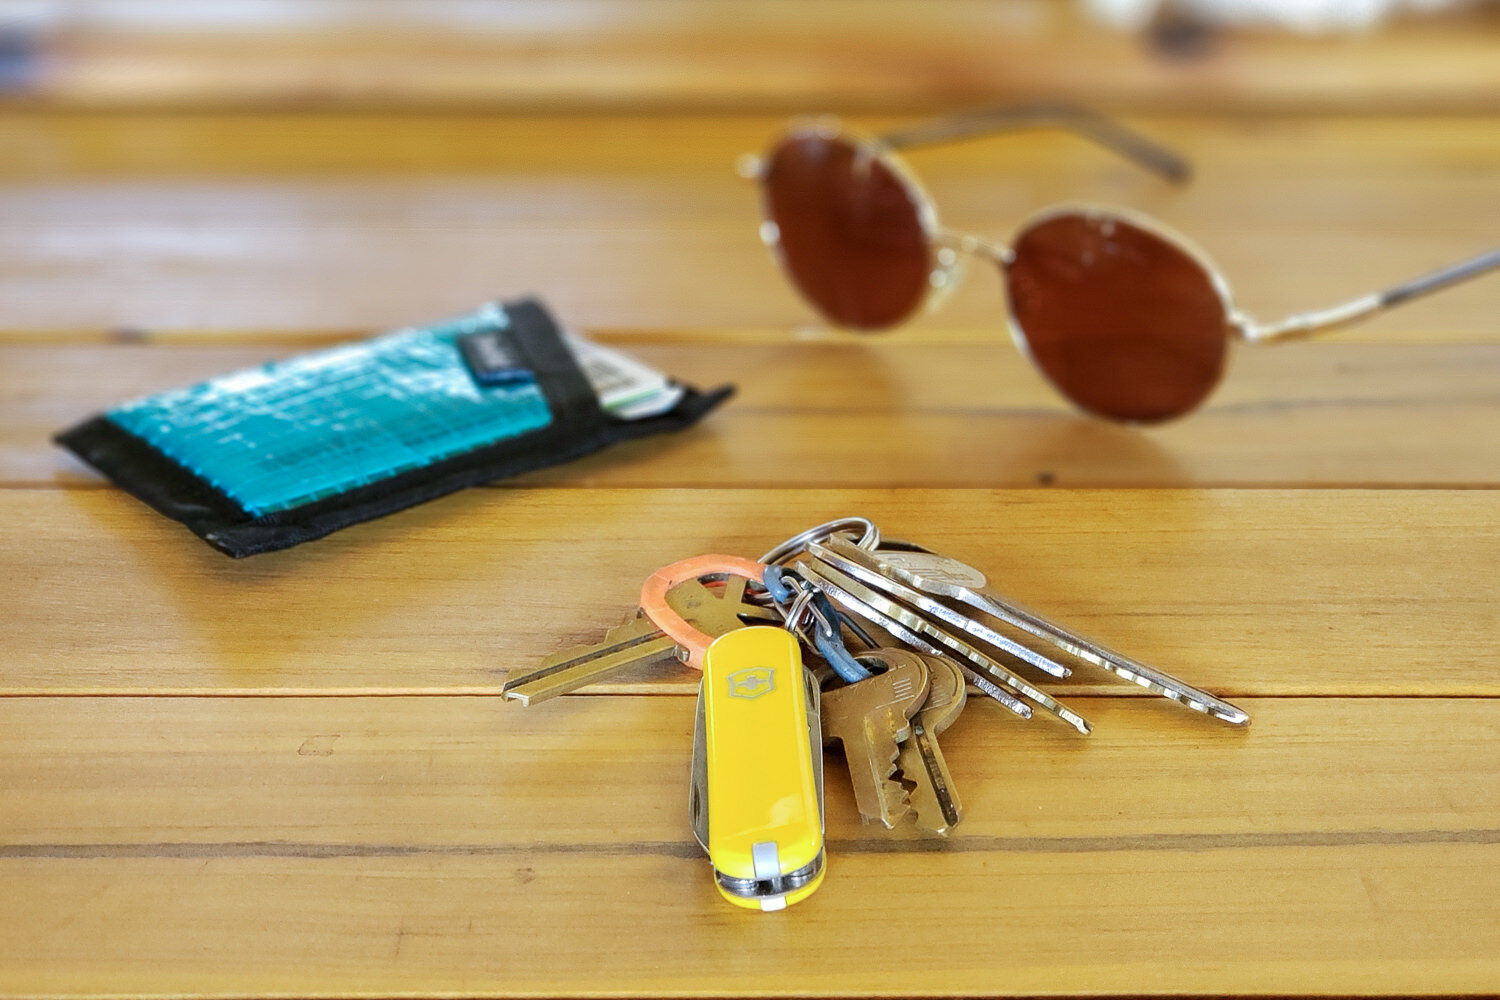 The Victorinox Swiss Army Classic SD multitool is handy, compact, and it weighs less than an ounce on your keychain.